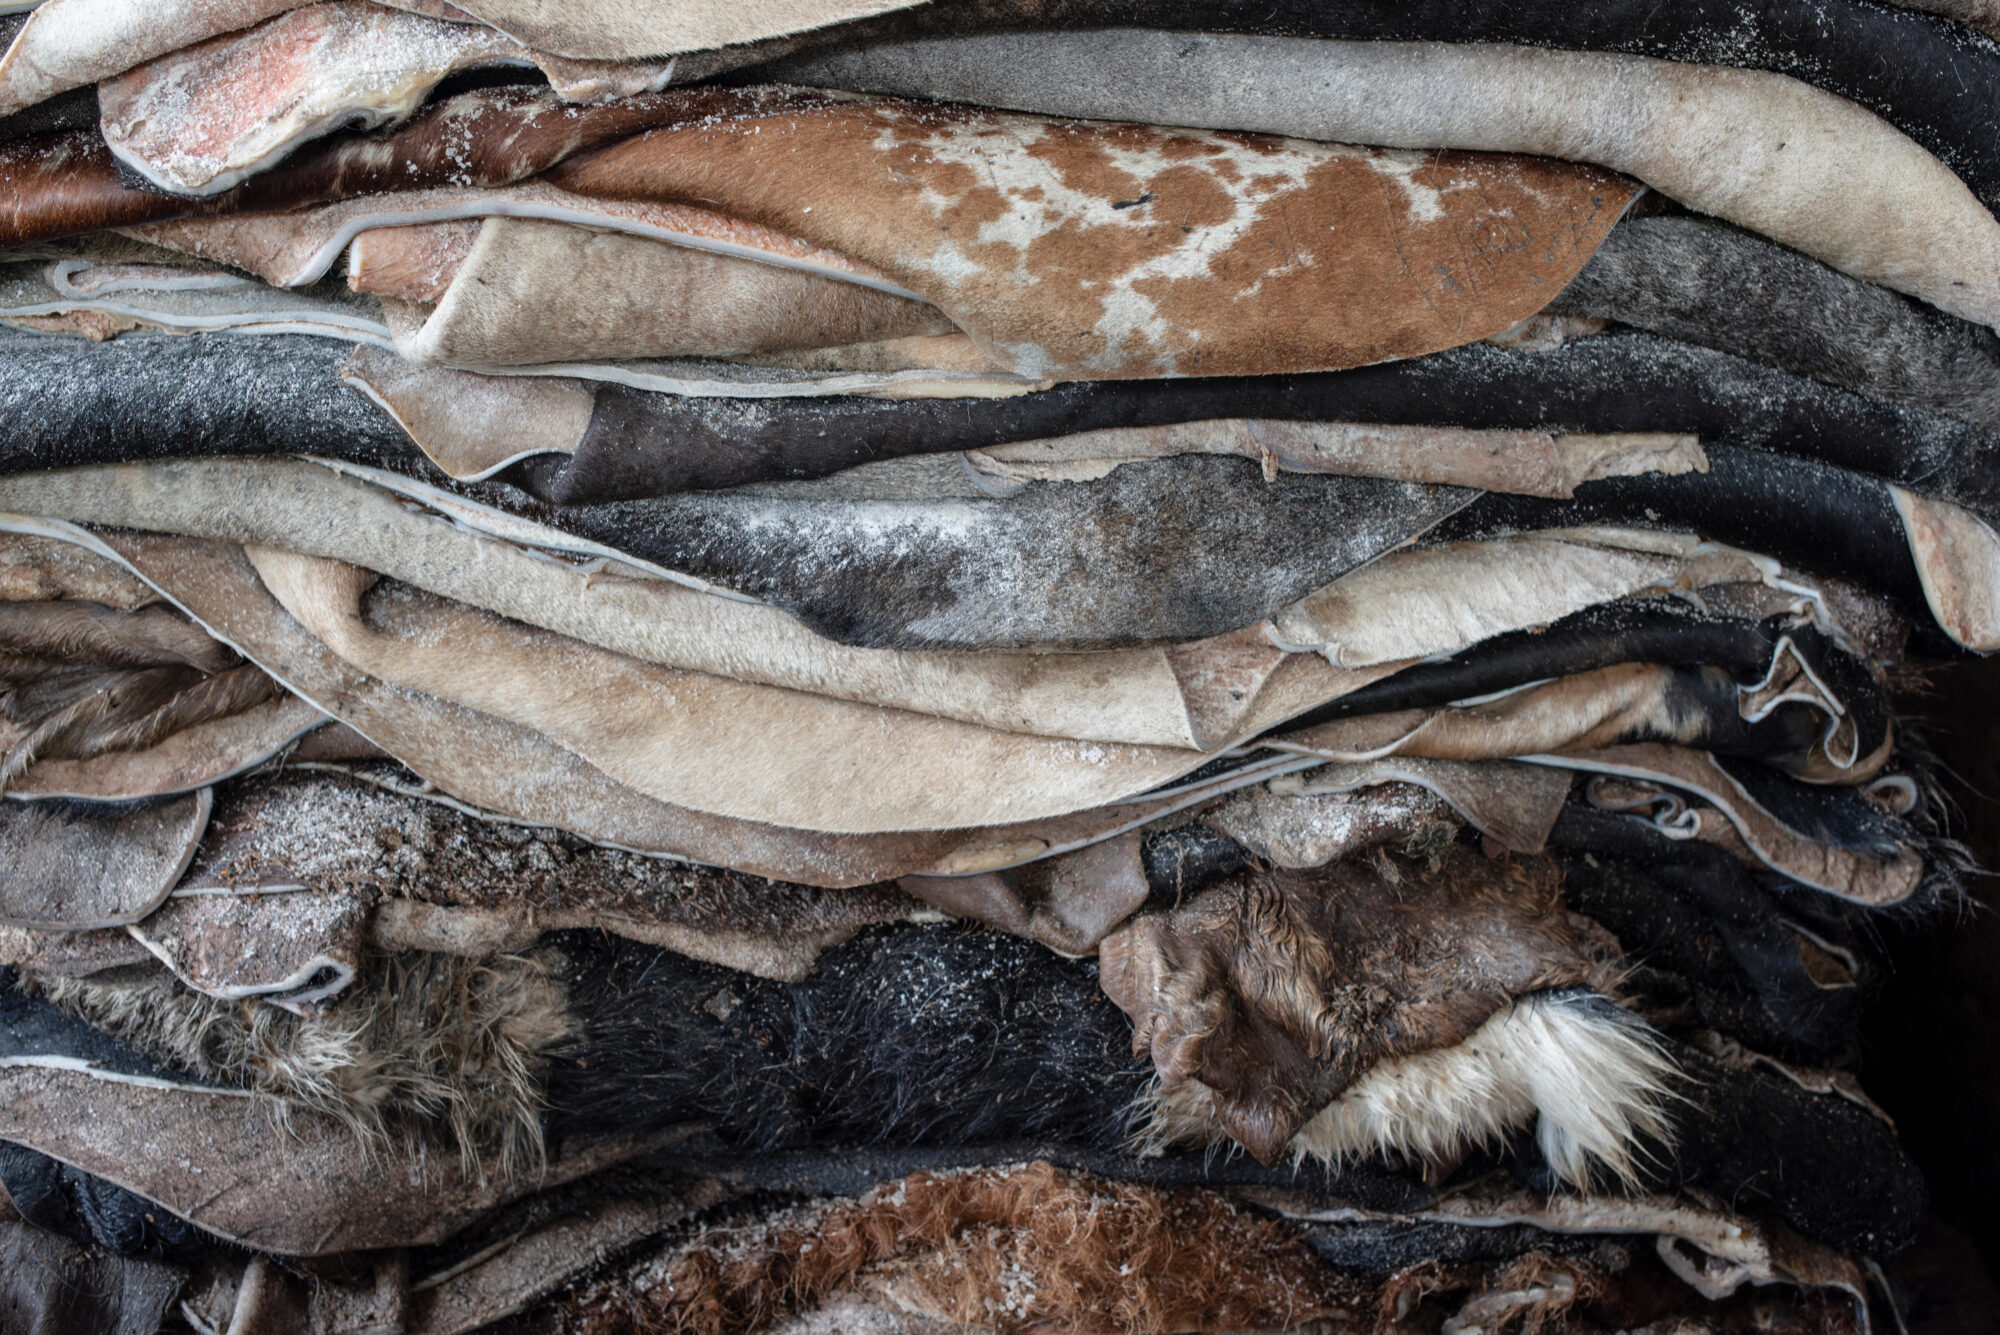 <p>In 2020, more than 23 million units of raw leather were acquired by Brazilian tanneries, of which 43% were in the Legal Amazon, up from 27% in 2010 (Image: Alamy / Cavan Images)</p>